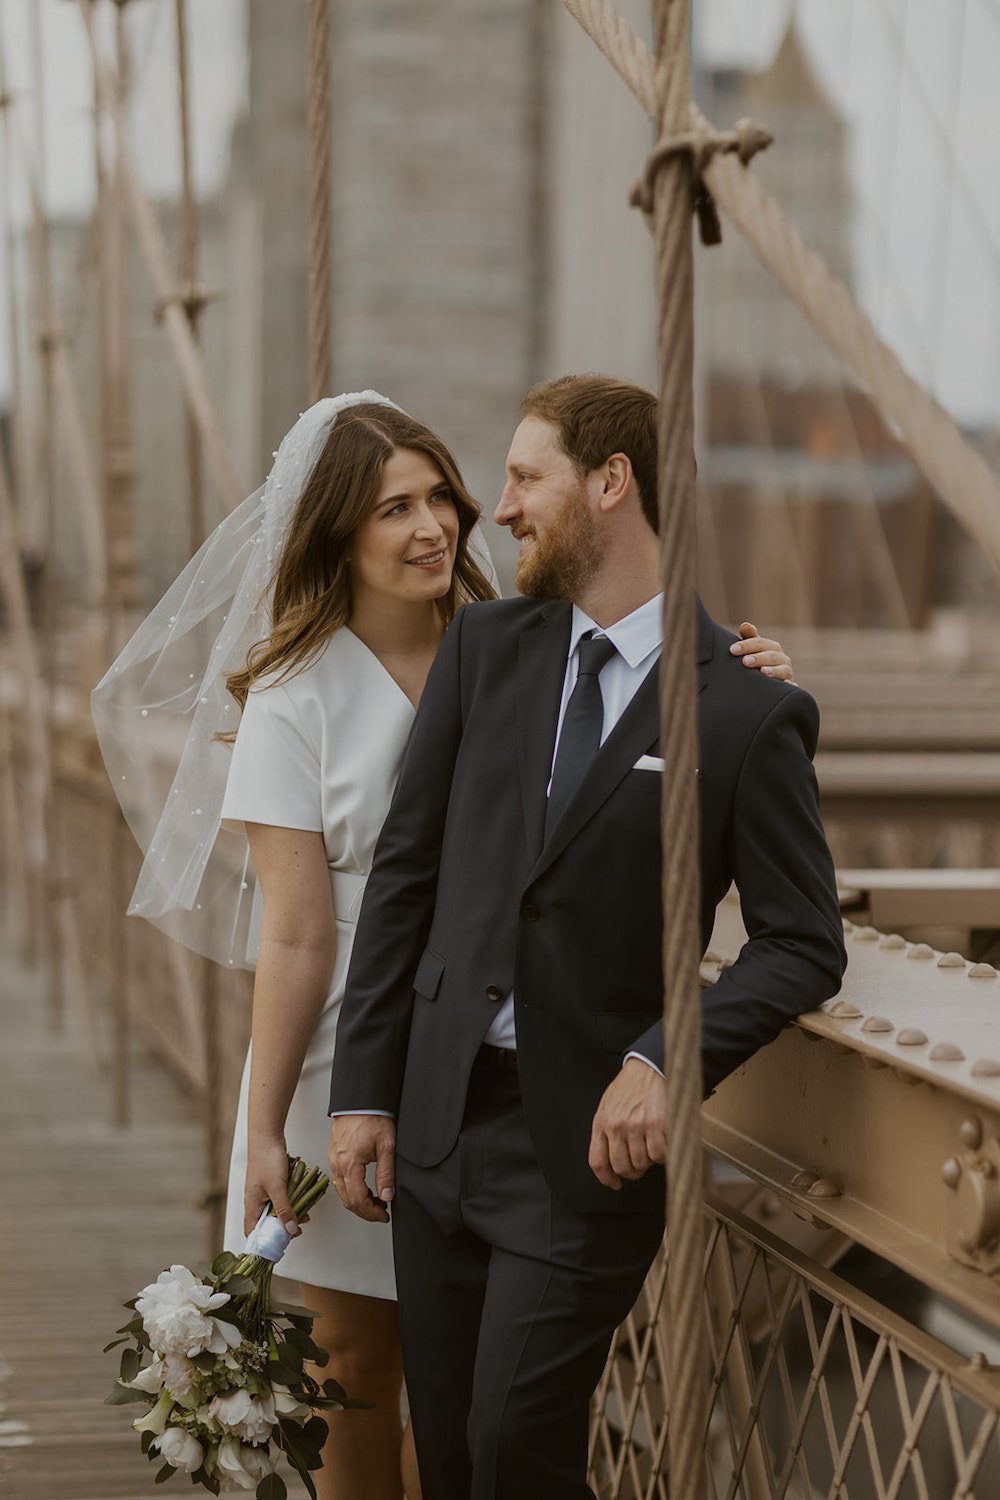 Maren looks at her new husband while relaxing on the Brooklyn Bridge.